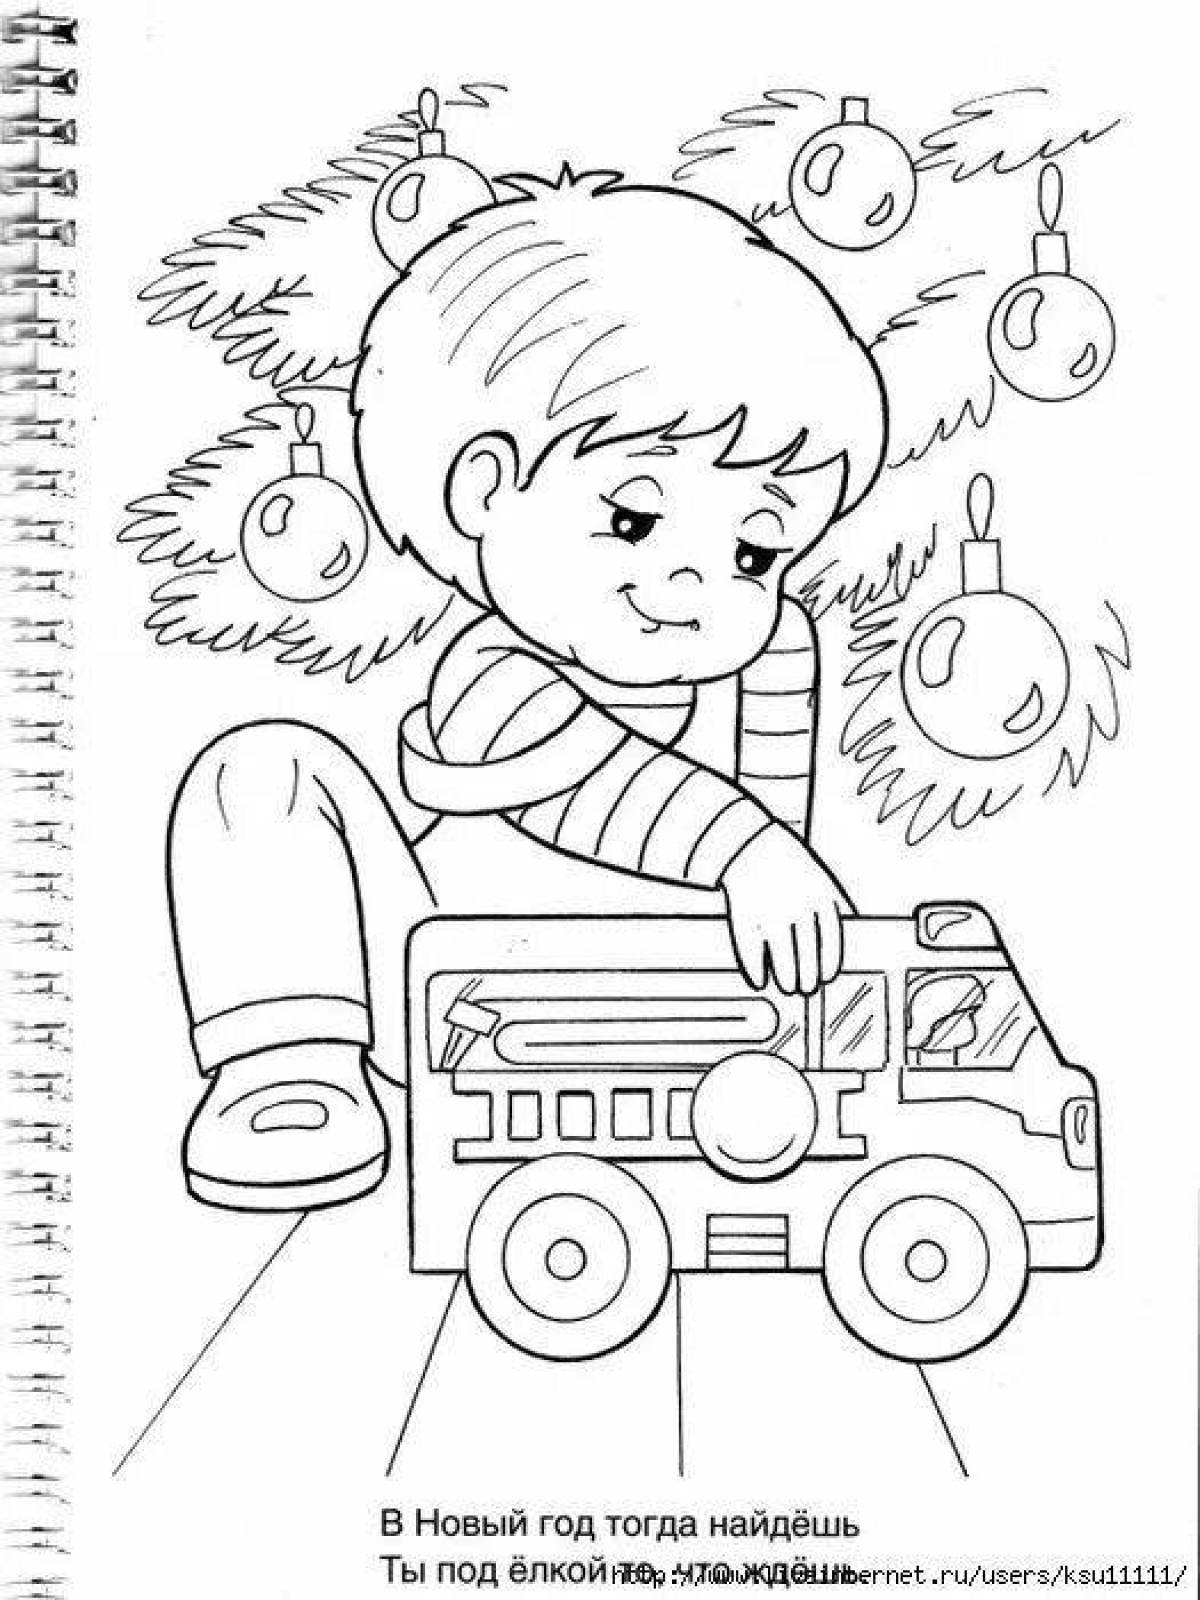 Fancy Christmas car coloring page